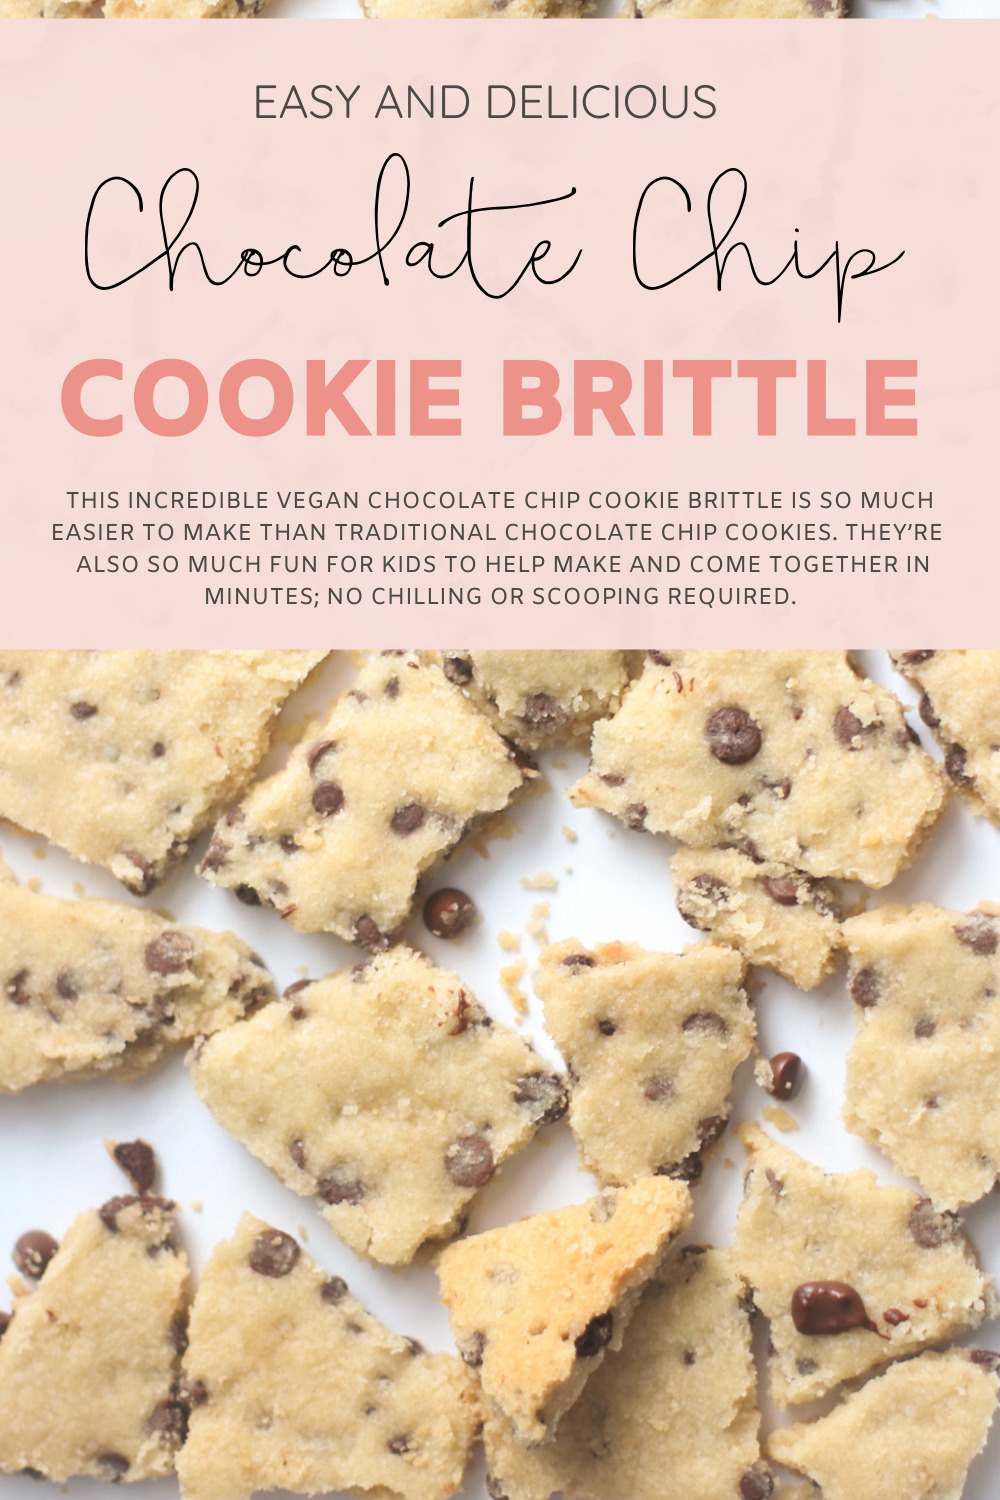 Vegan Chocolate Chip Cookie Brittle Recipe - These Cookies are Highly Snackable and So Much Easier Than Traditional Chocolate Chip Cookies | @glitterinclexi | GLITTERINC.COM